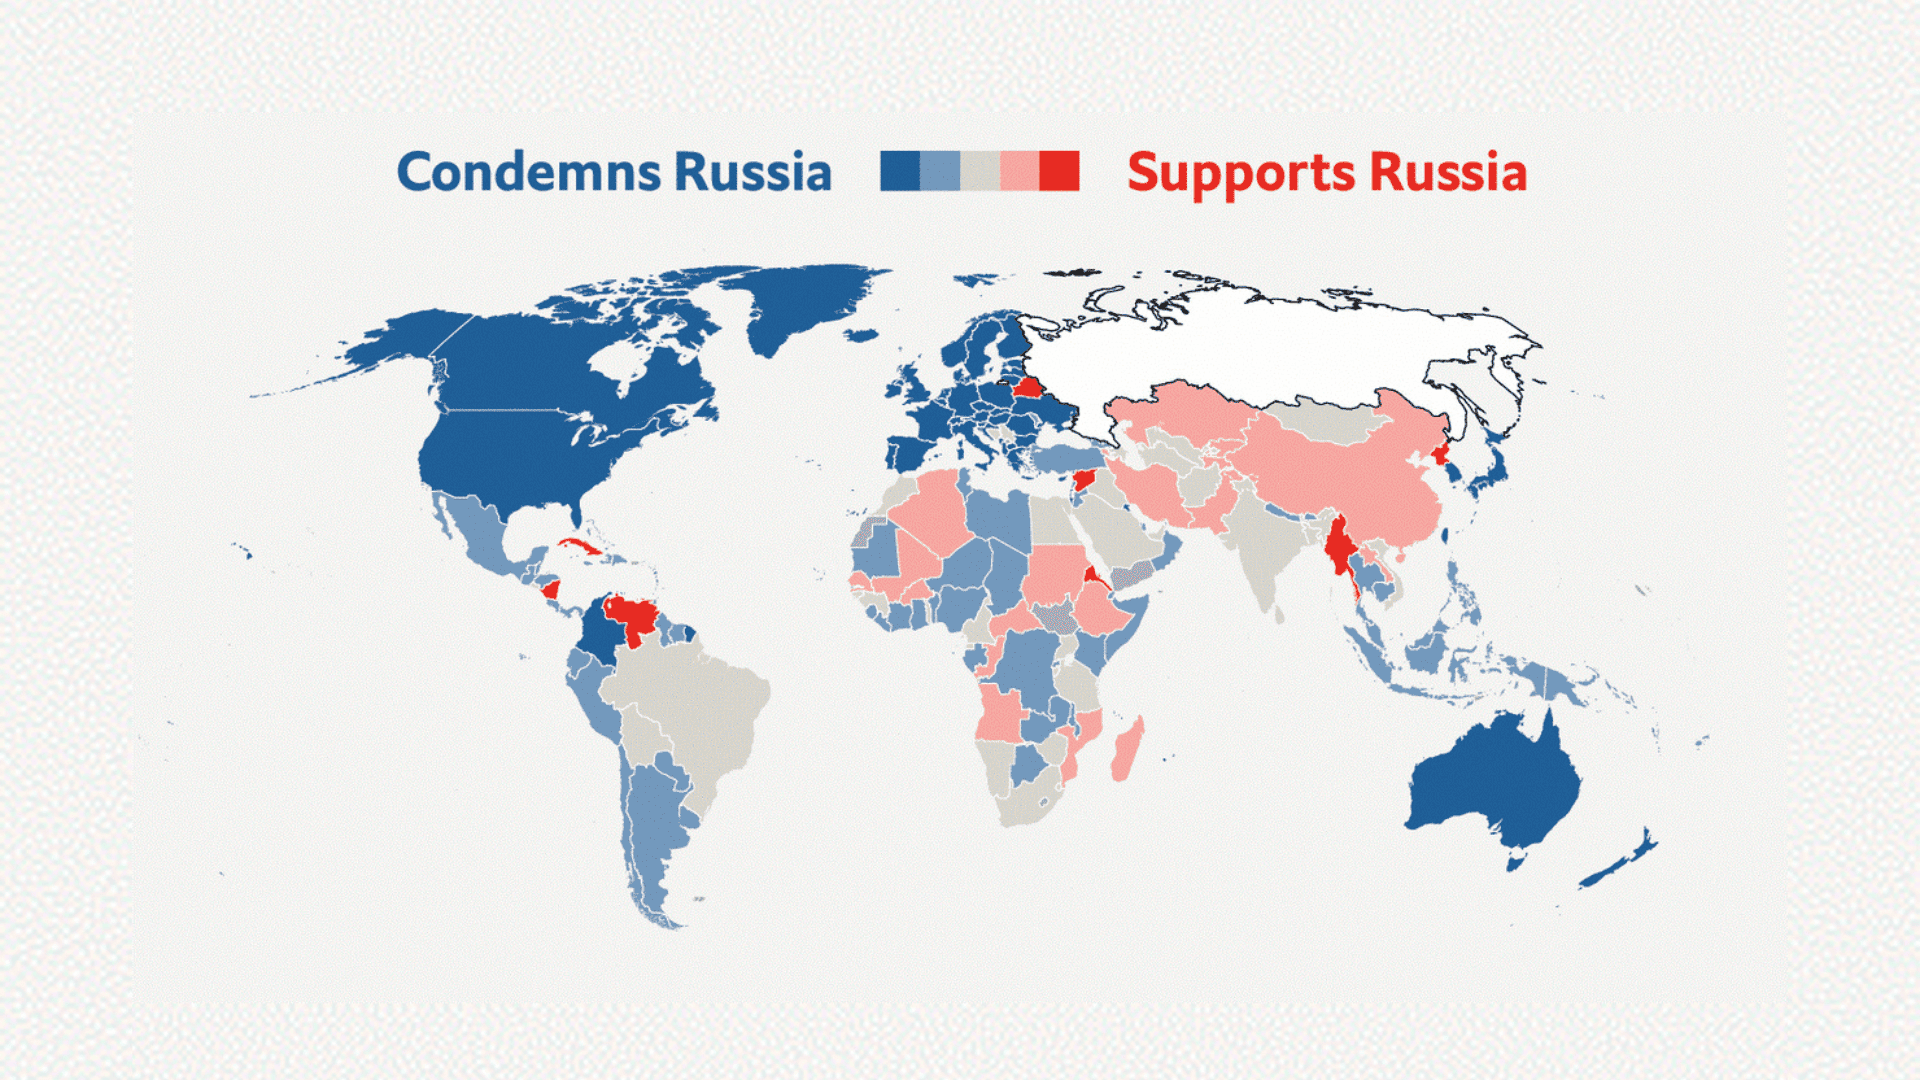 Unprecedented Response to Russian Invasion - Image Source-Who Are Russia’s Supporters, The Economist (Apr. 4, 2022)